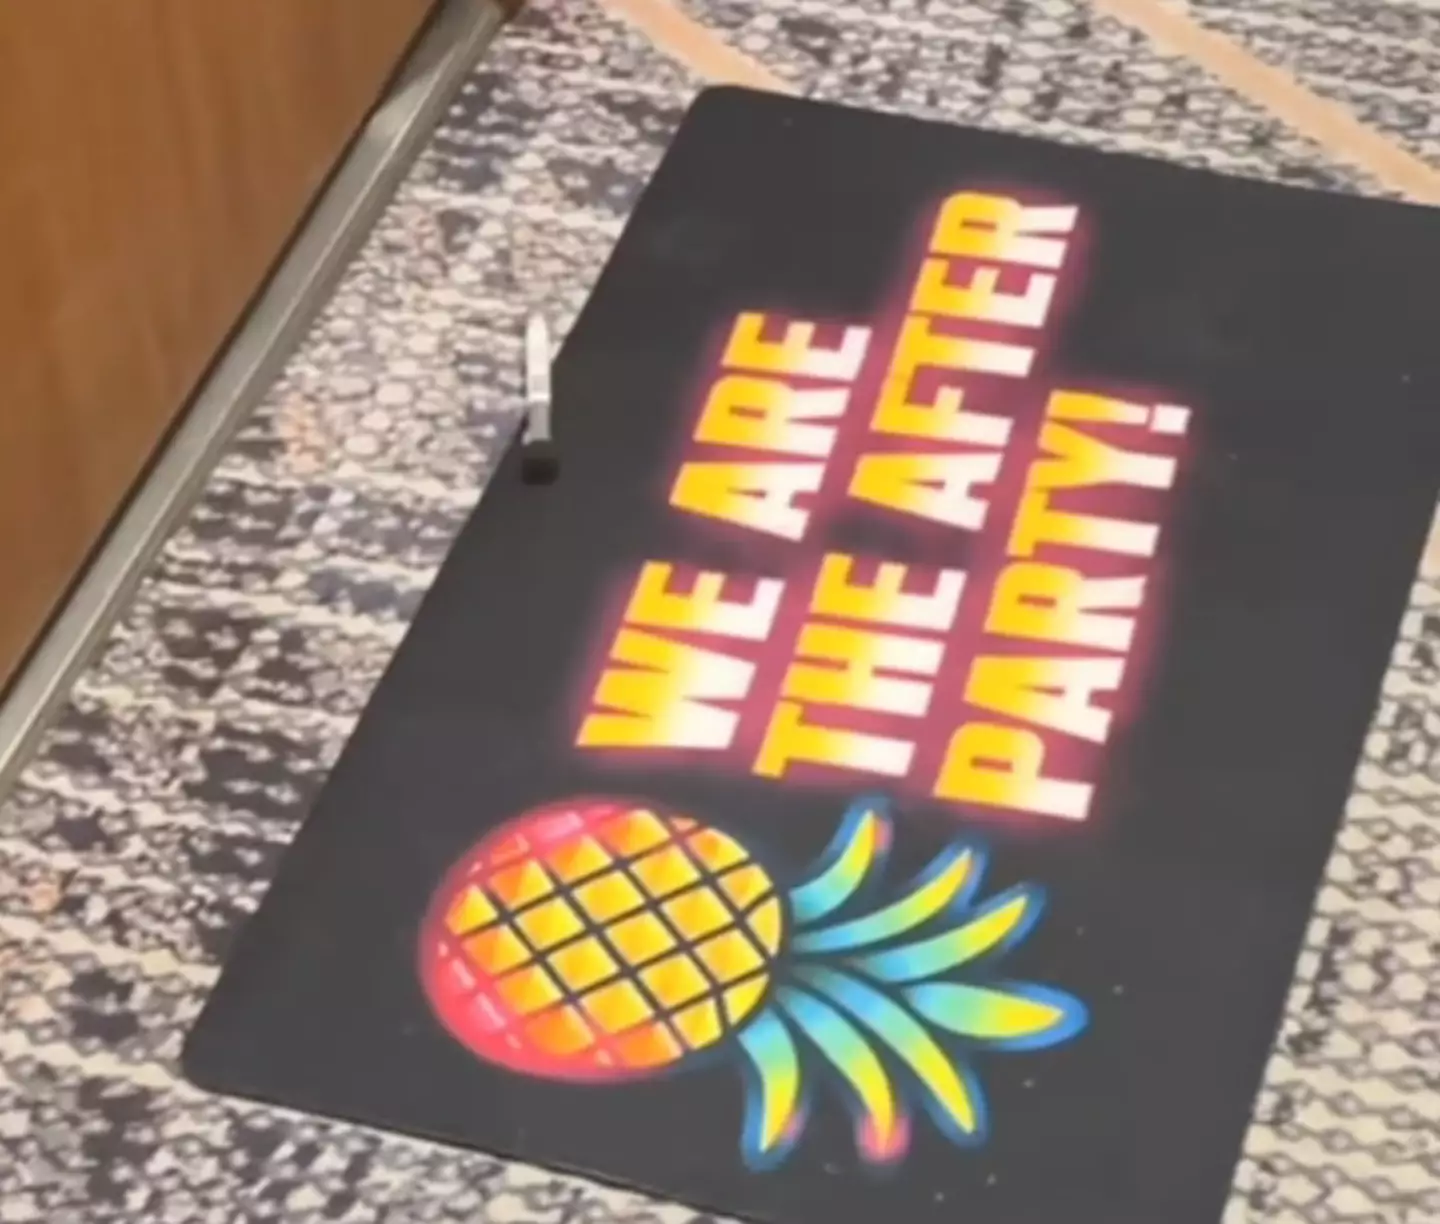 Pineapple doormat. If you know, you know.